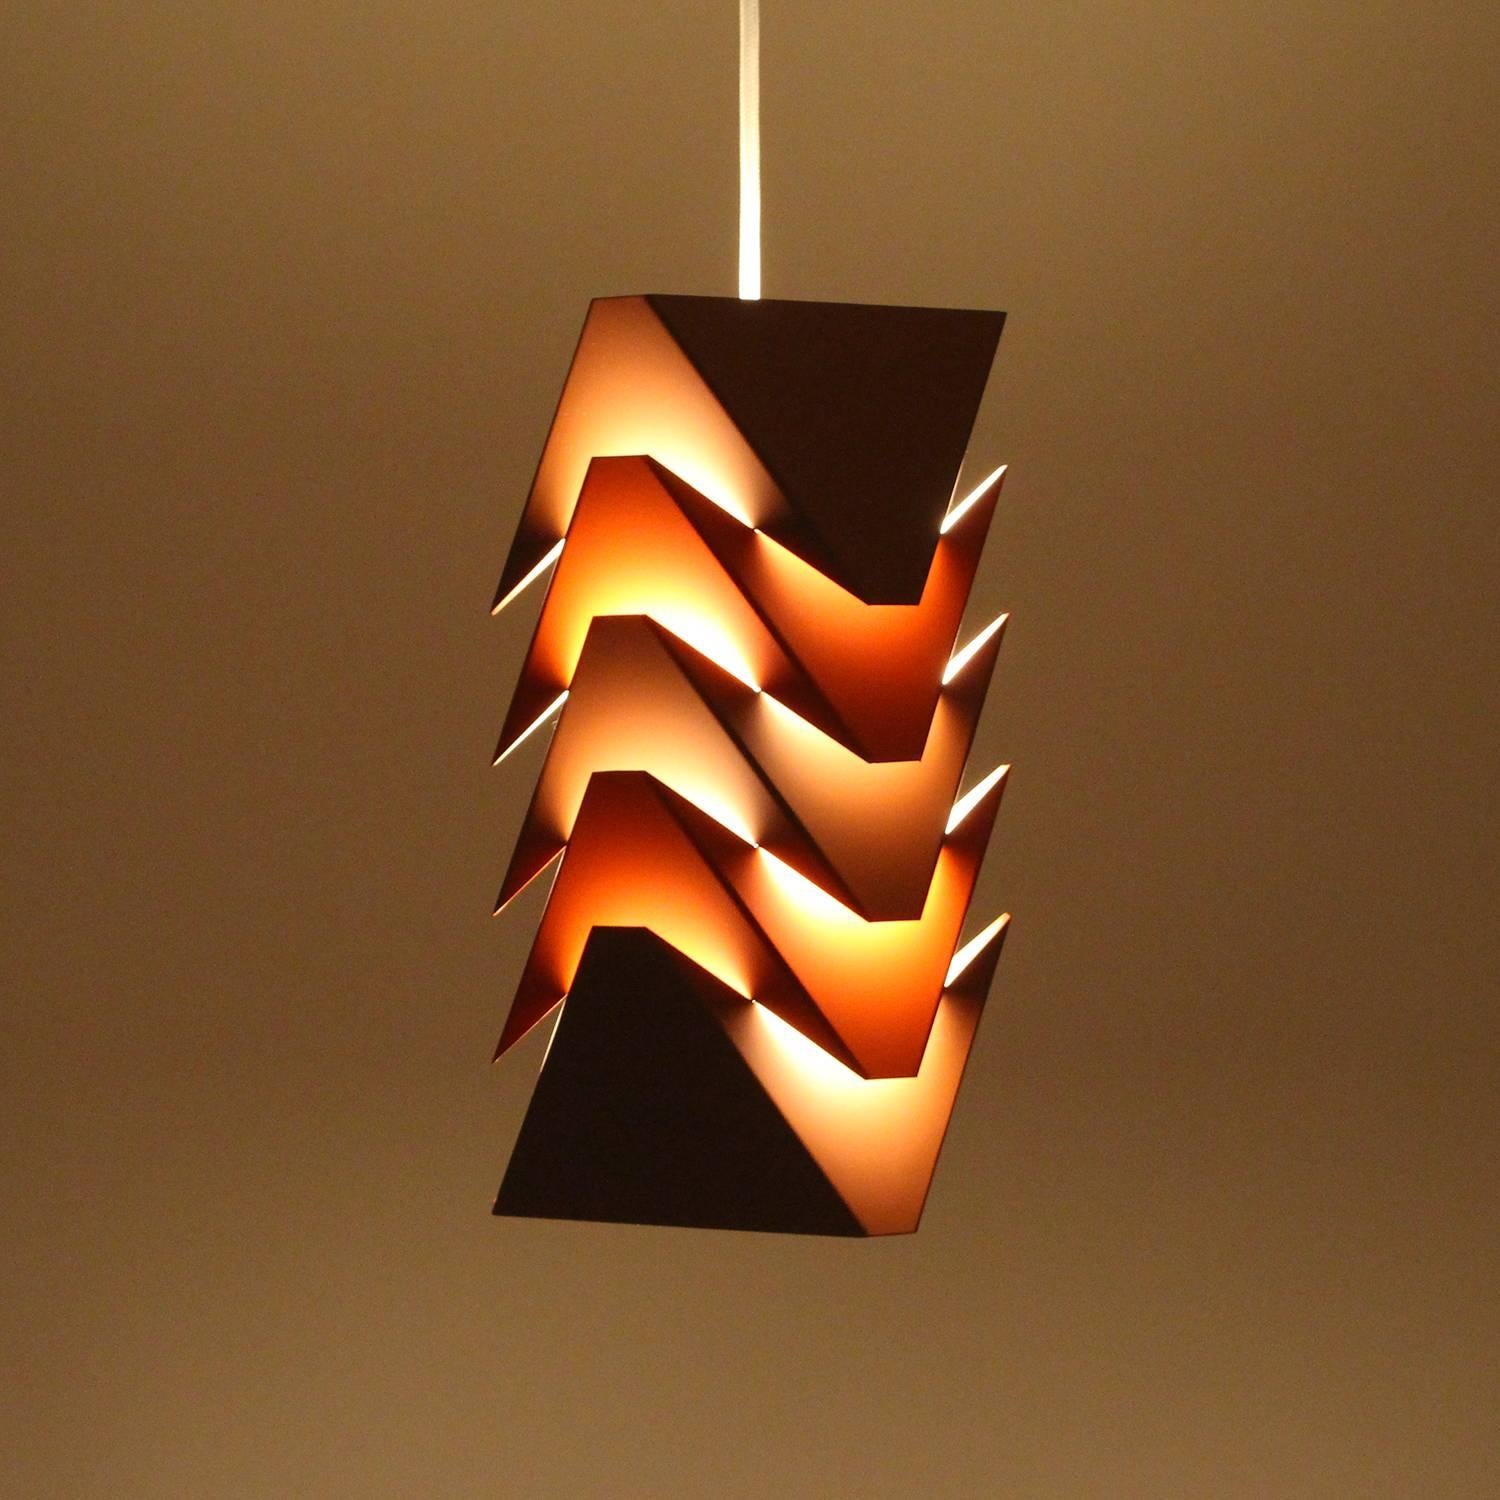 EKKO pendant by Louis Weisdorf for LYFA in 1968 - extremely attractive rare brown and orange hanging light in very good vintage condition.

Five thin lacquered metal pieces, angular shaped to fit perfect on top off each other, and together they